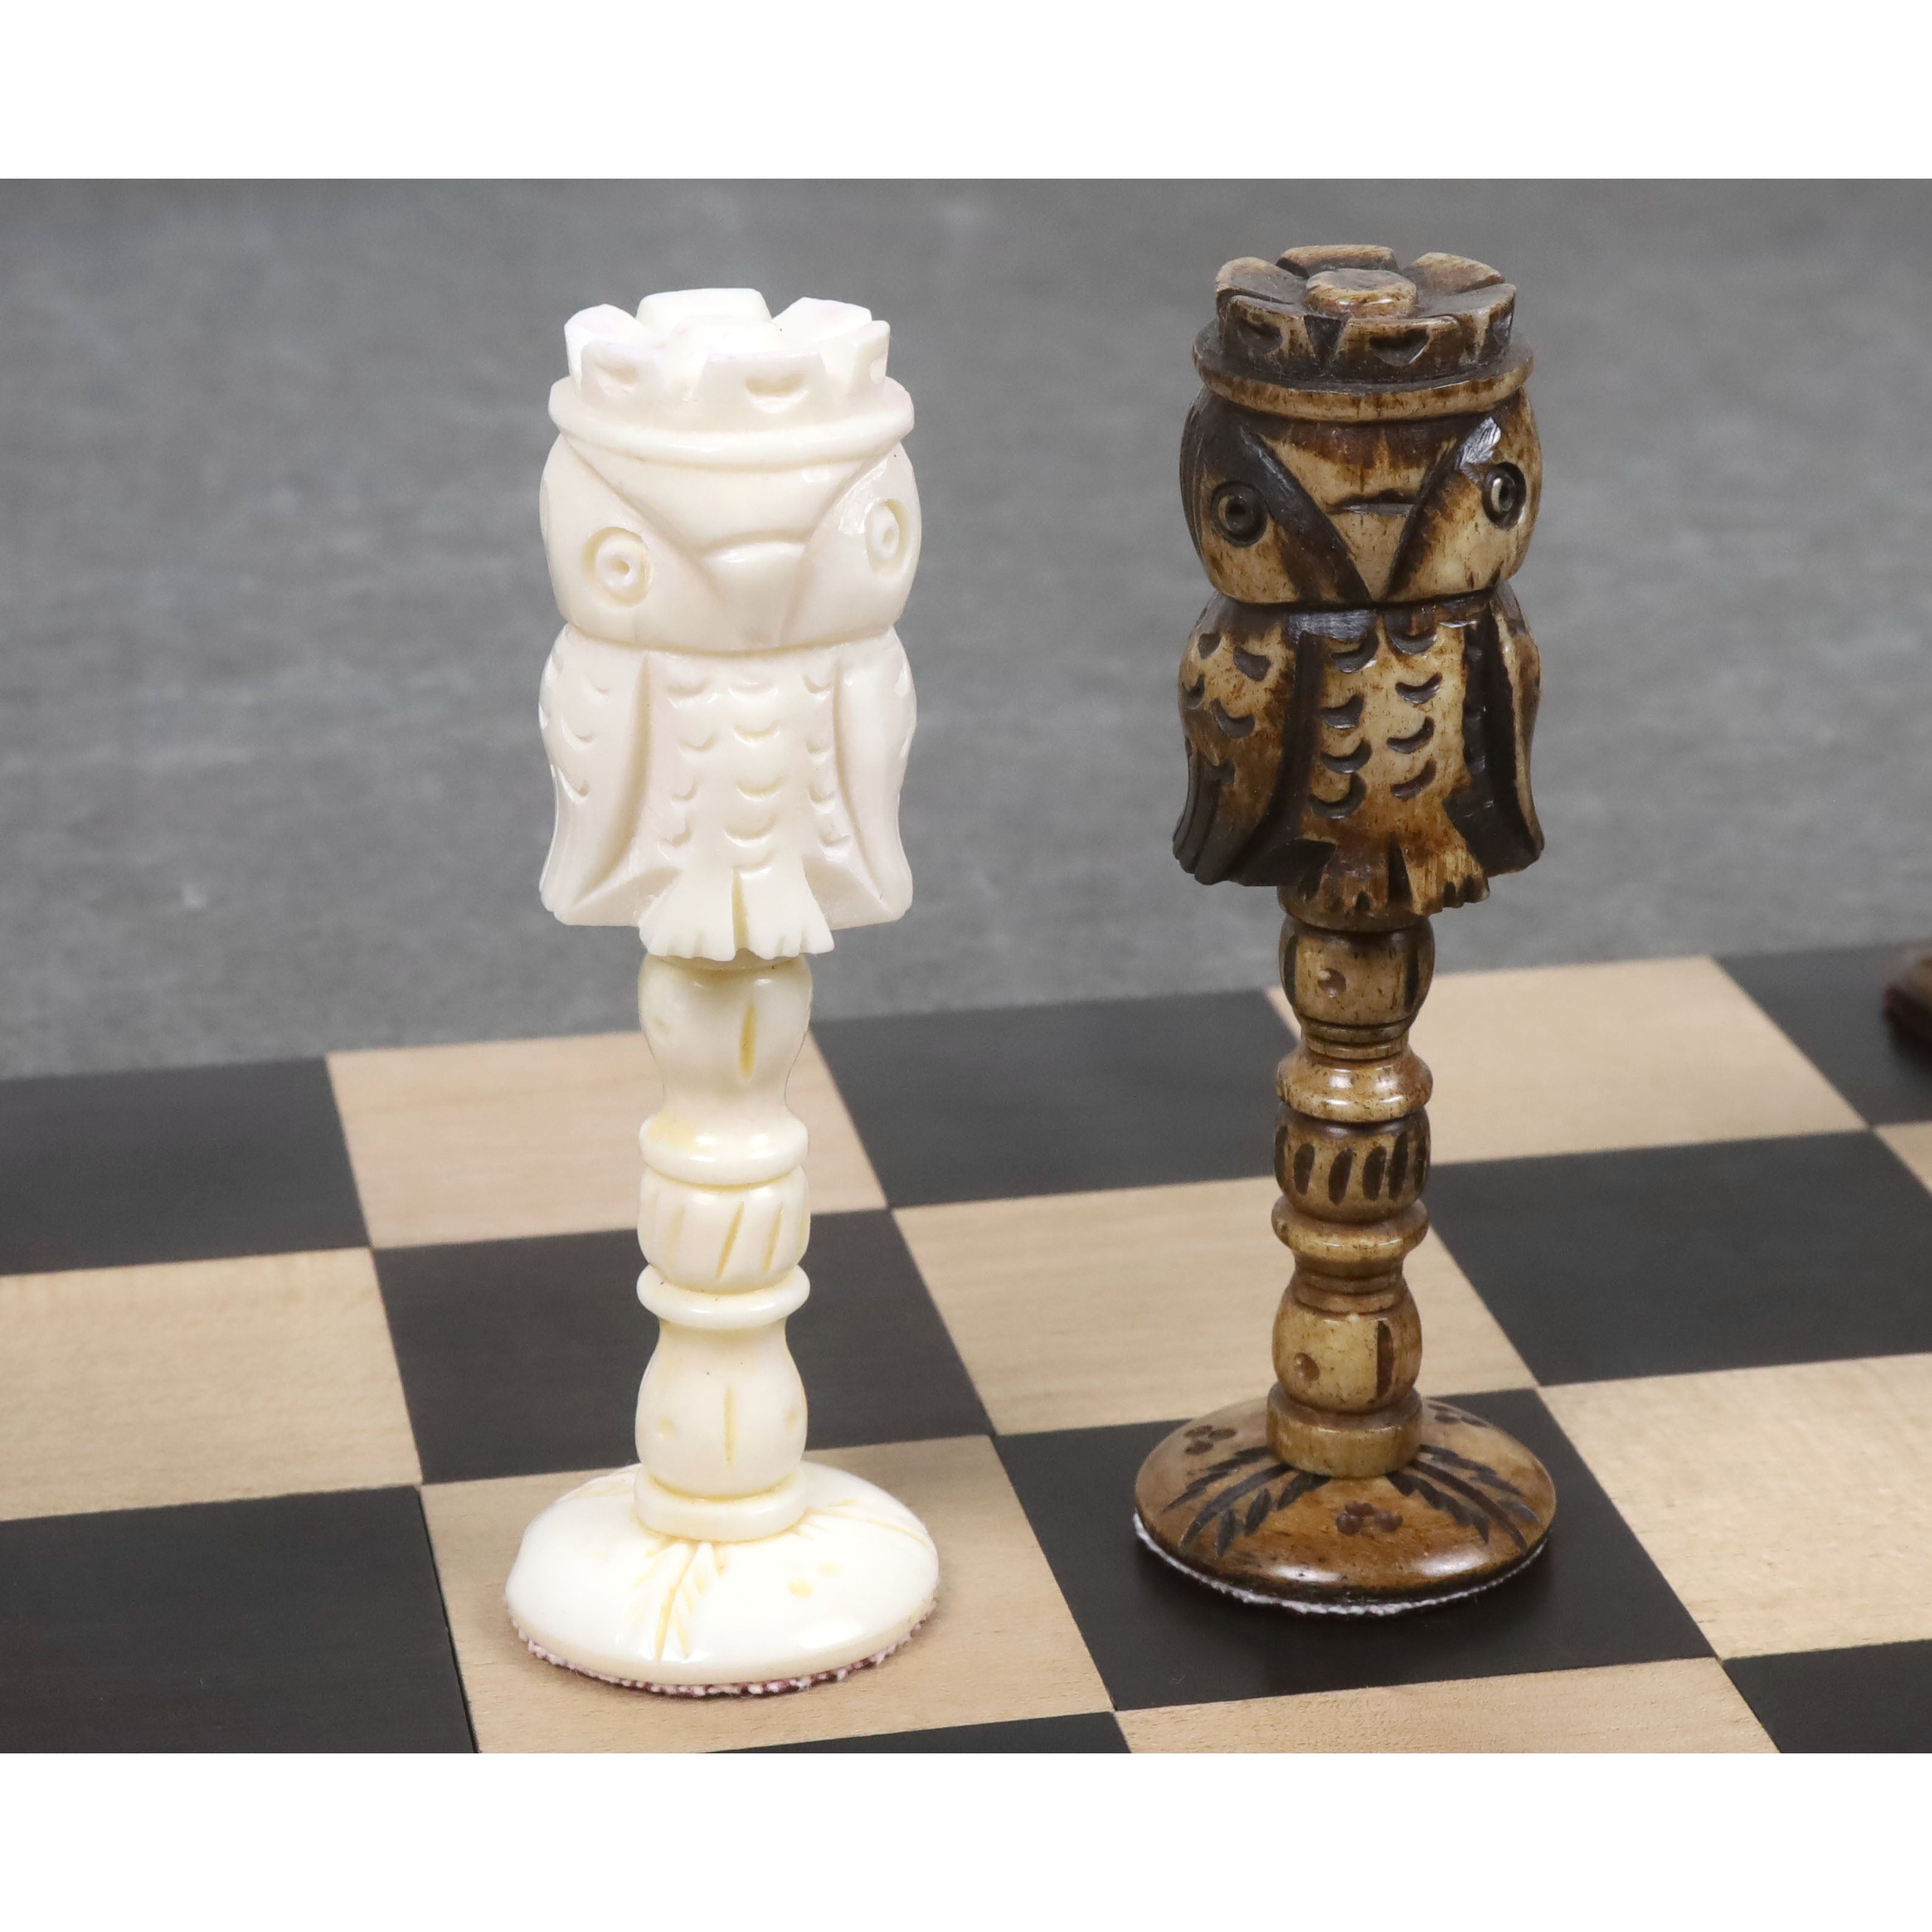 4" Animal Kingdom Series Chess Pieces Only Set - Distress Antiqued Camel Bone - Warehouse Clearance - USA Shipping Only